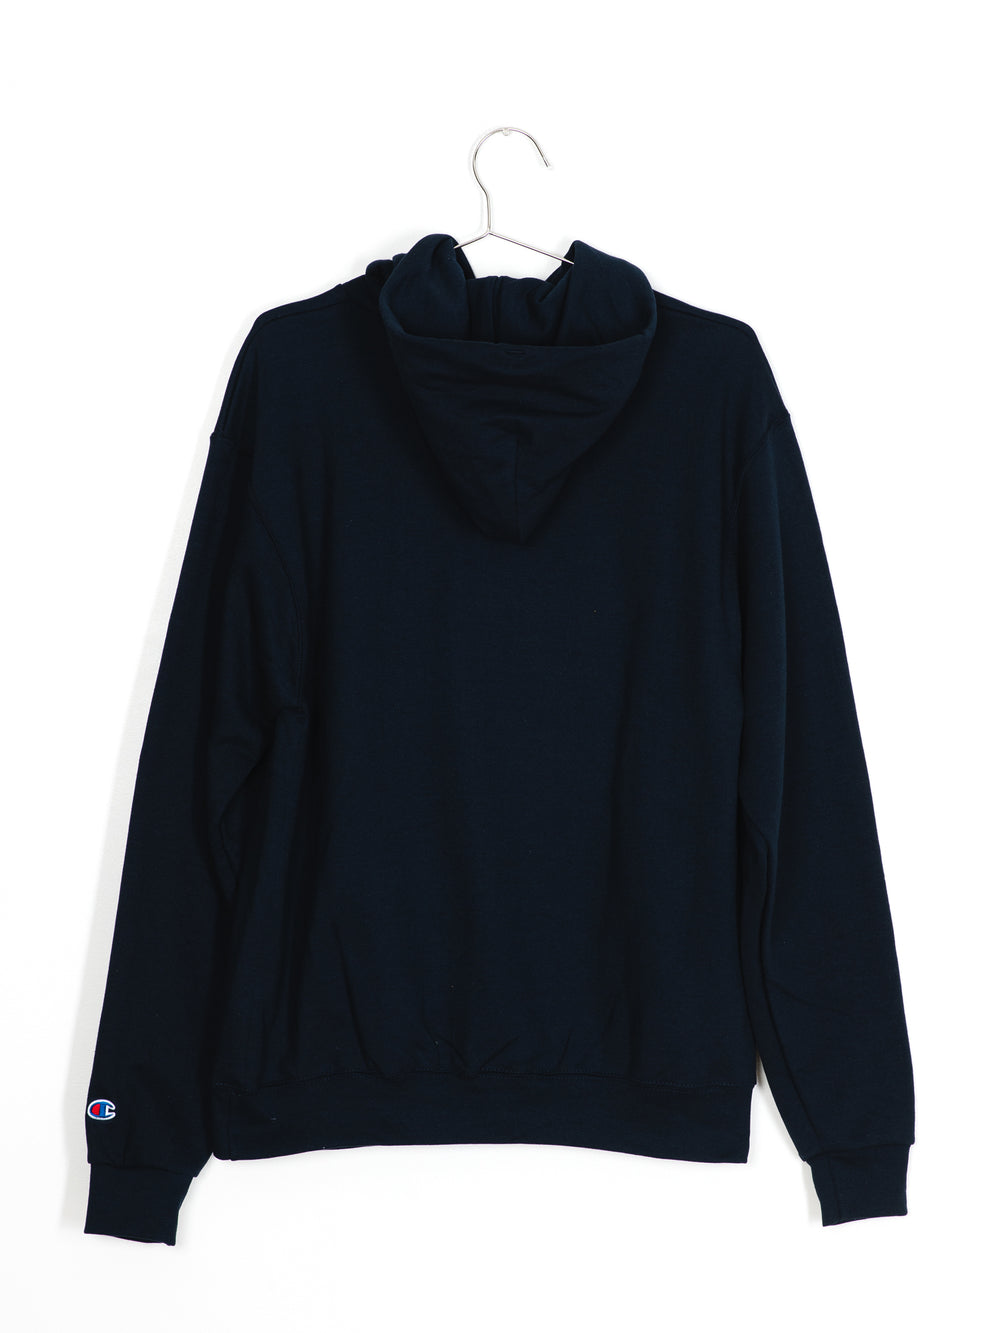 CHAMPION ECO POWERBLEND NOTRE DAME UNIVERSITY HOODIE - CLEARANCE